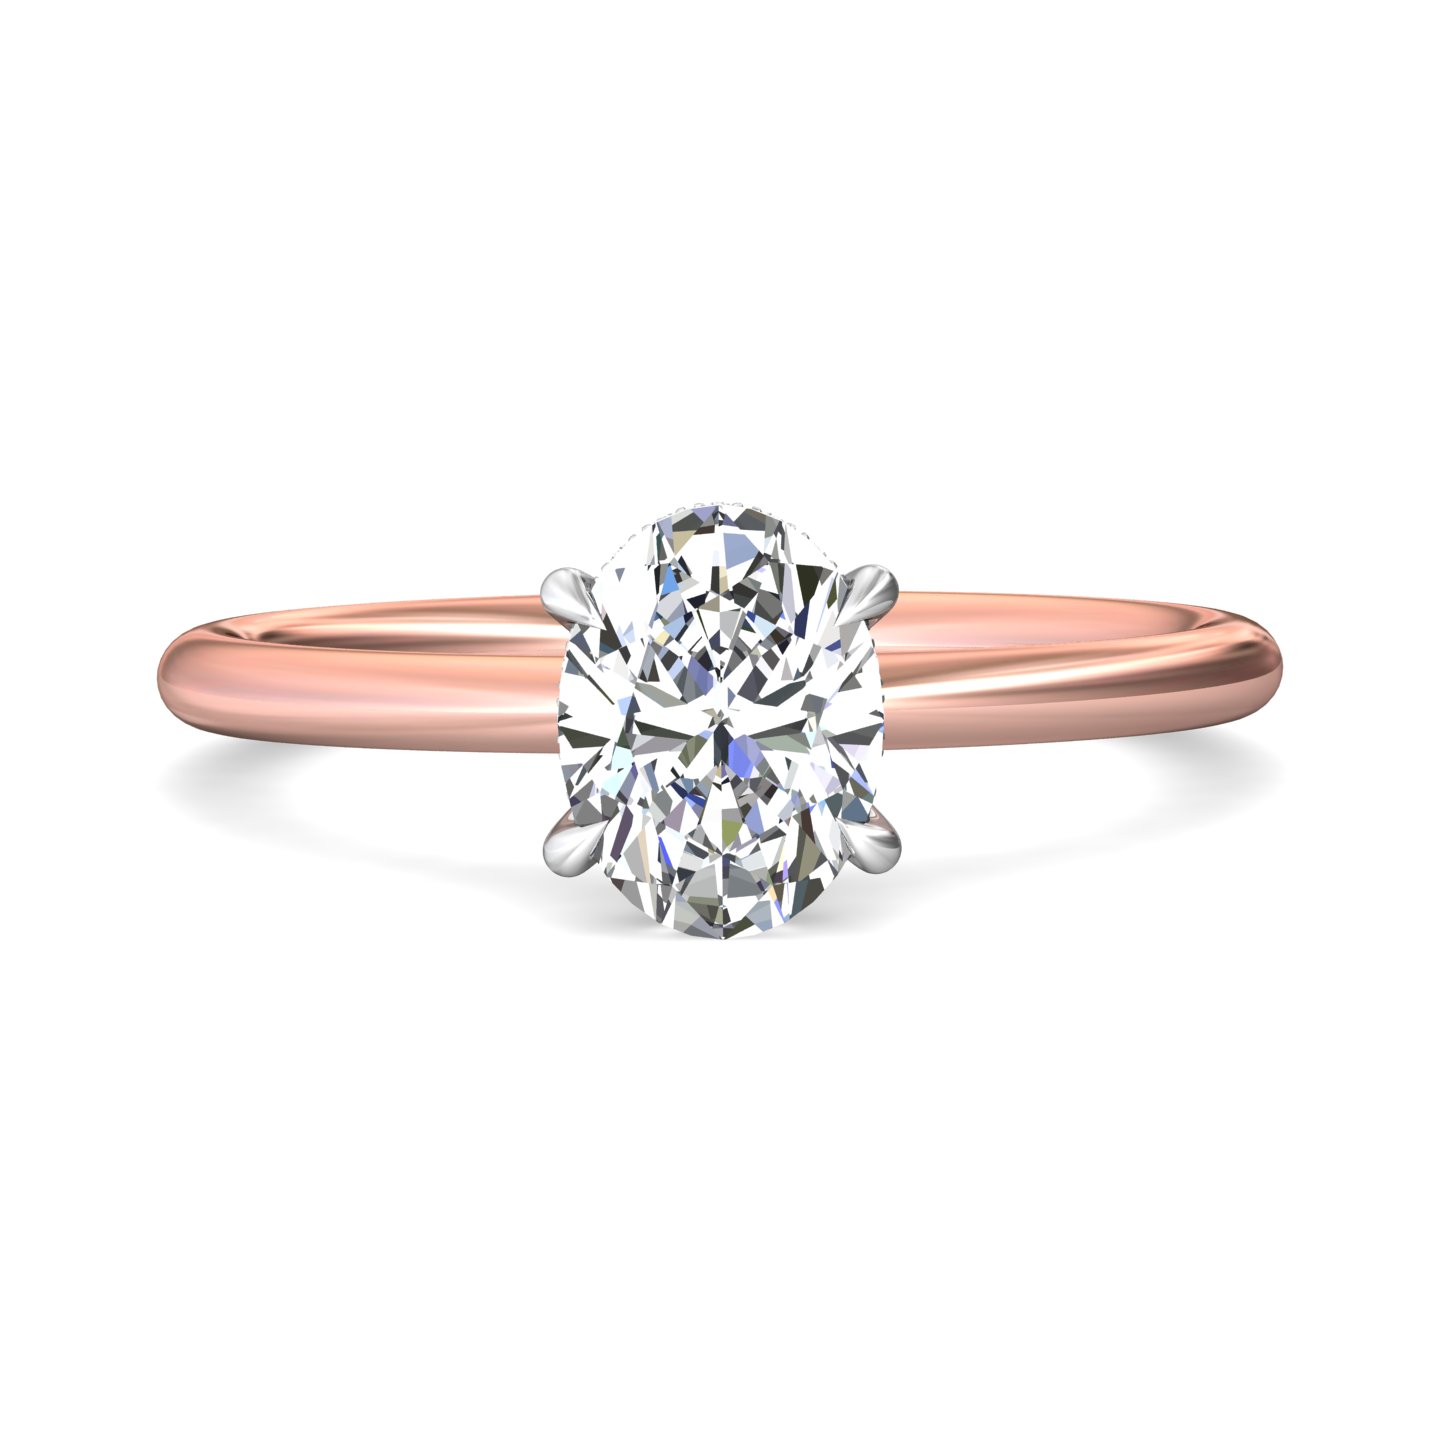 14K WHITE & ROSE GOLD FLYER FIT SEMI-MOUNT RING SIZE 6.5 WITH 14=0.04TW ROUND H-I SI2 DIAMONDS